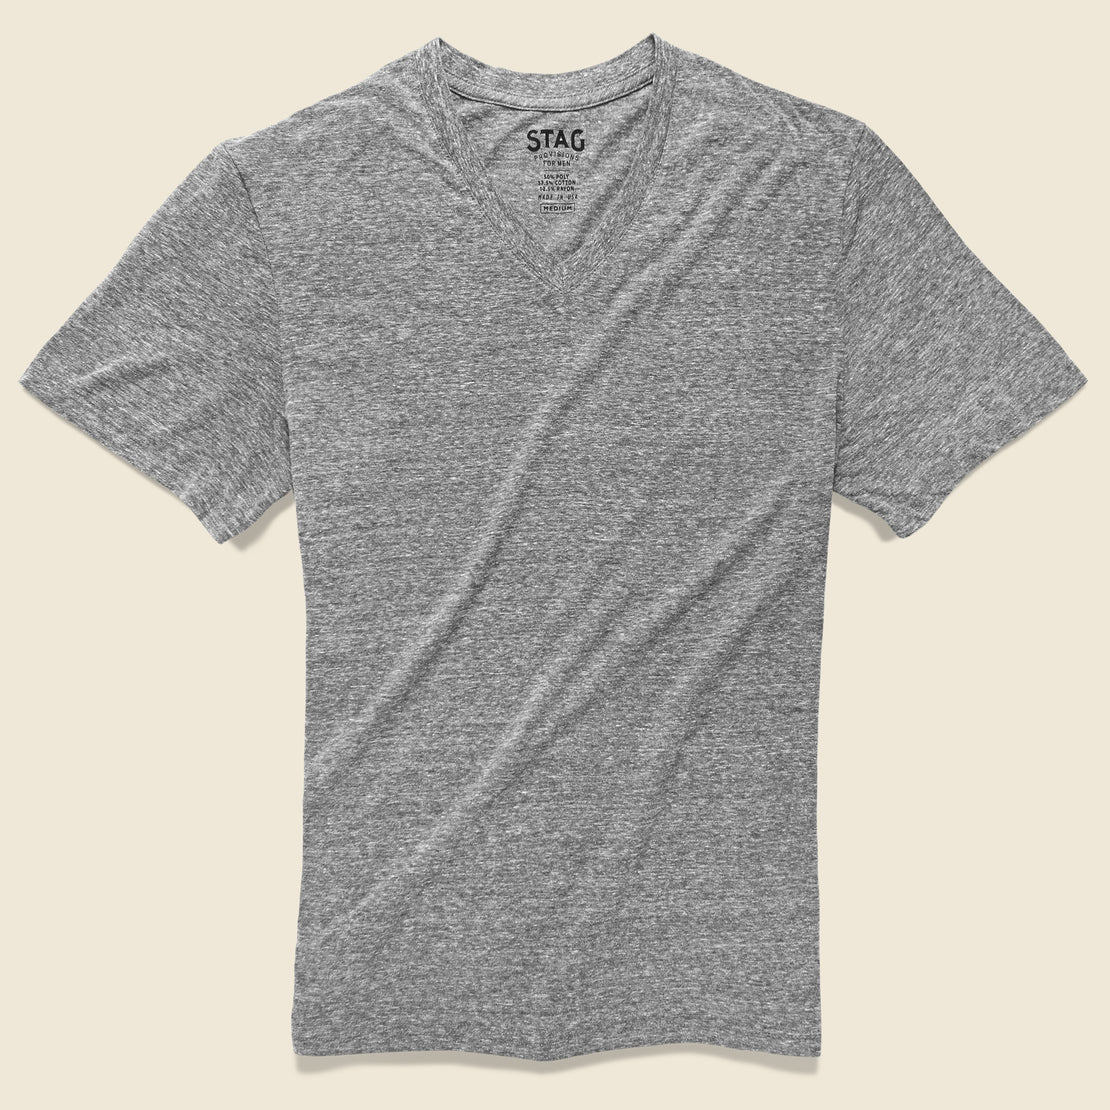 STAG V-Neck Tee - Grey